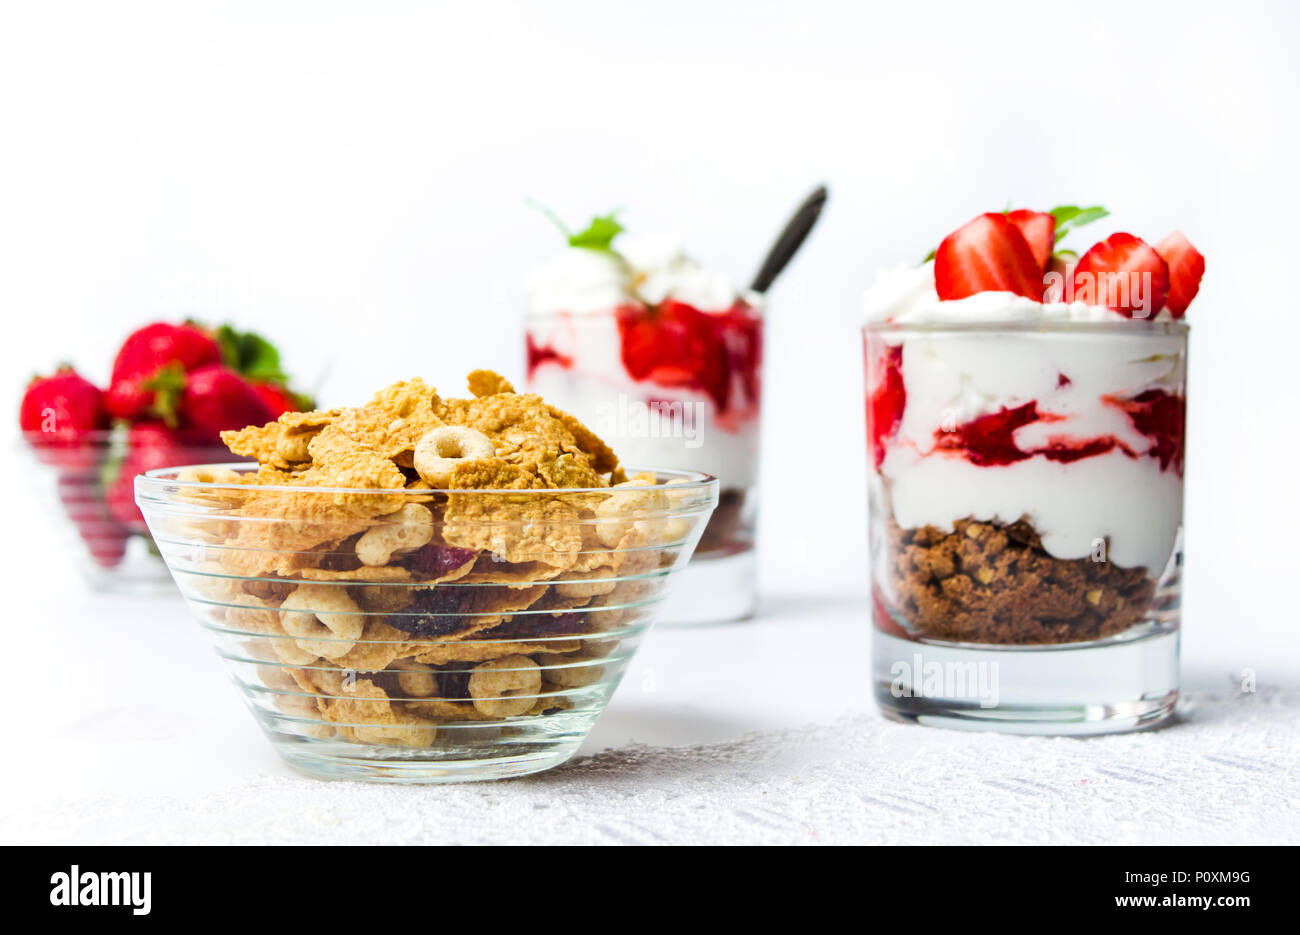 Strawberry parfait and cereals for a healthy breakfast Stock Photo